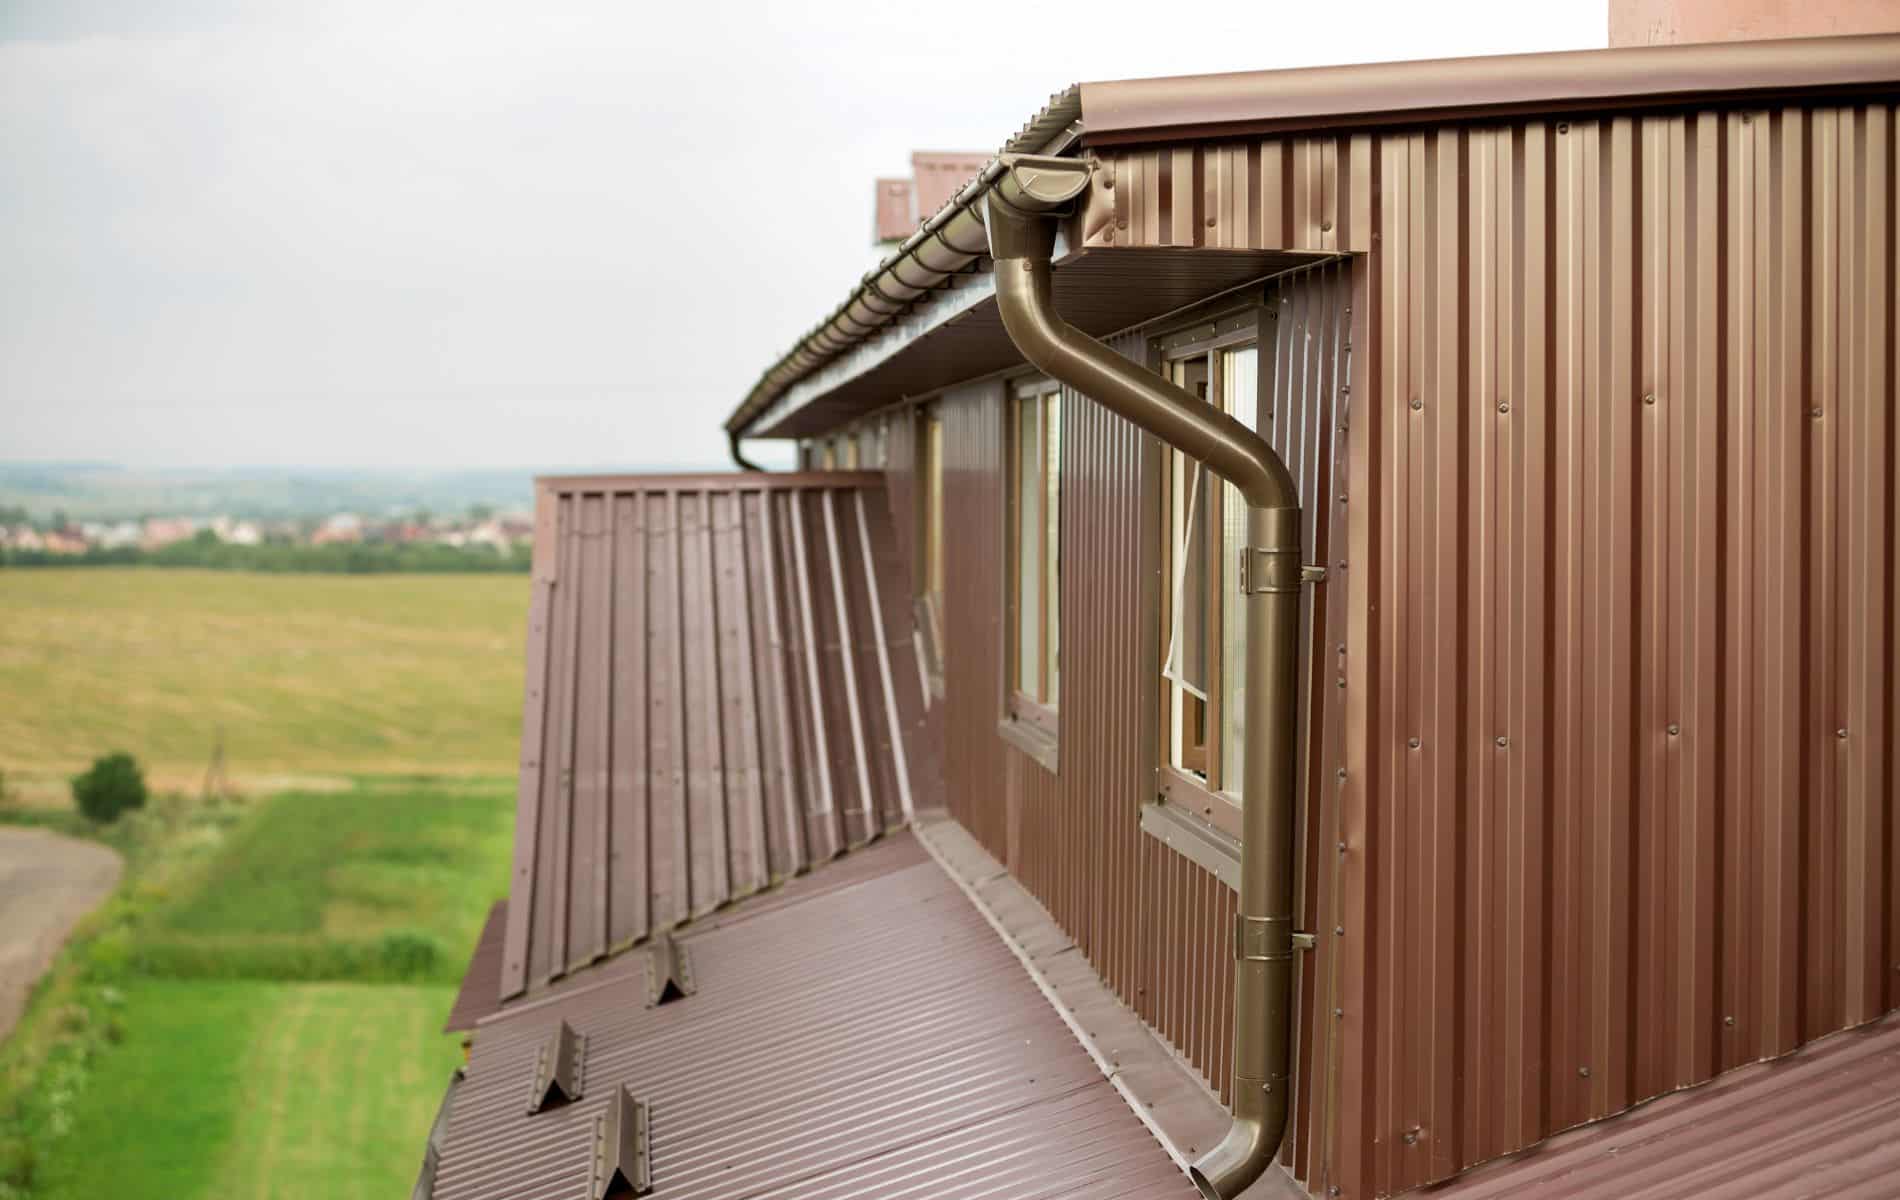 Metal Siding for Houses: Is it Worth it